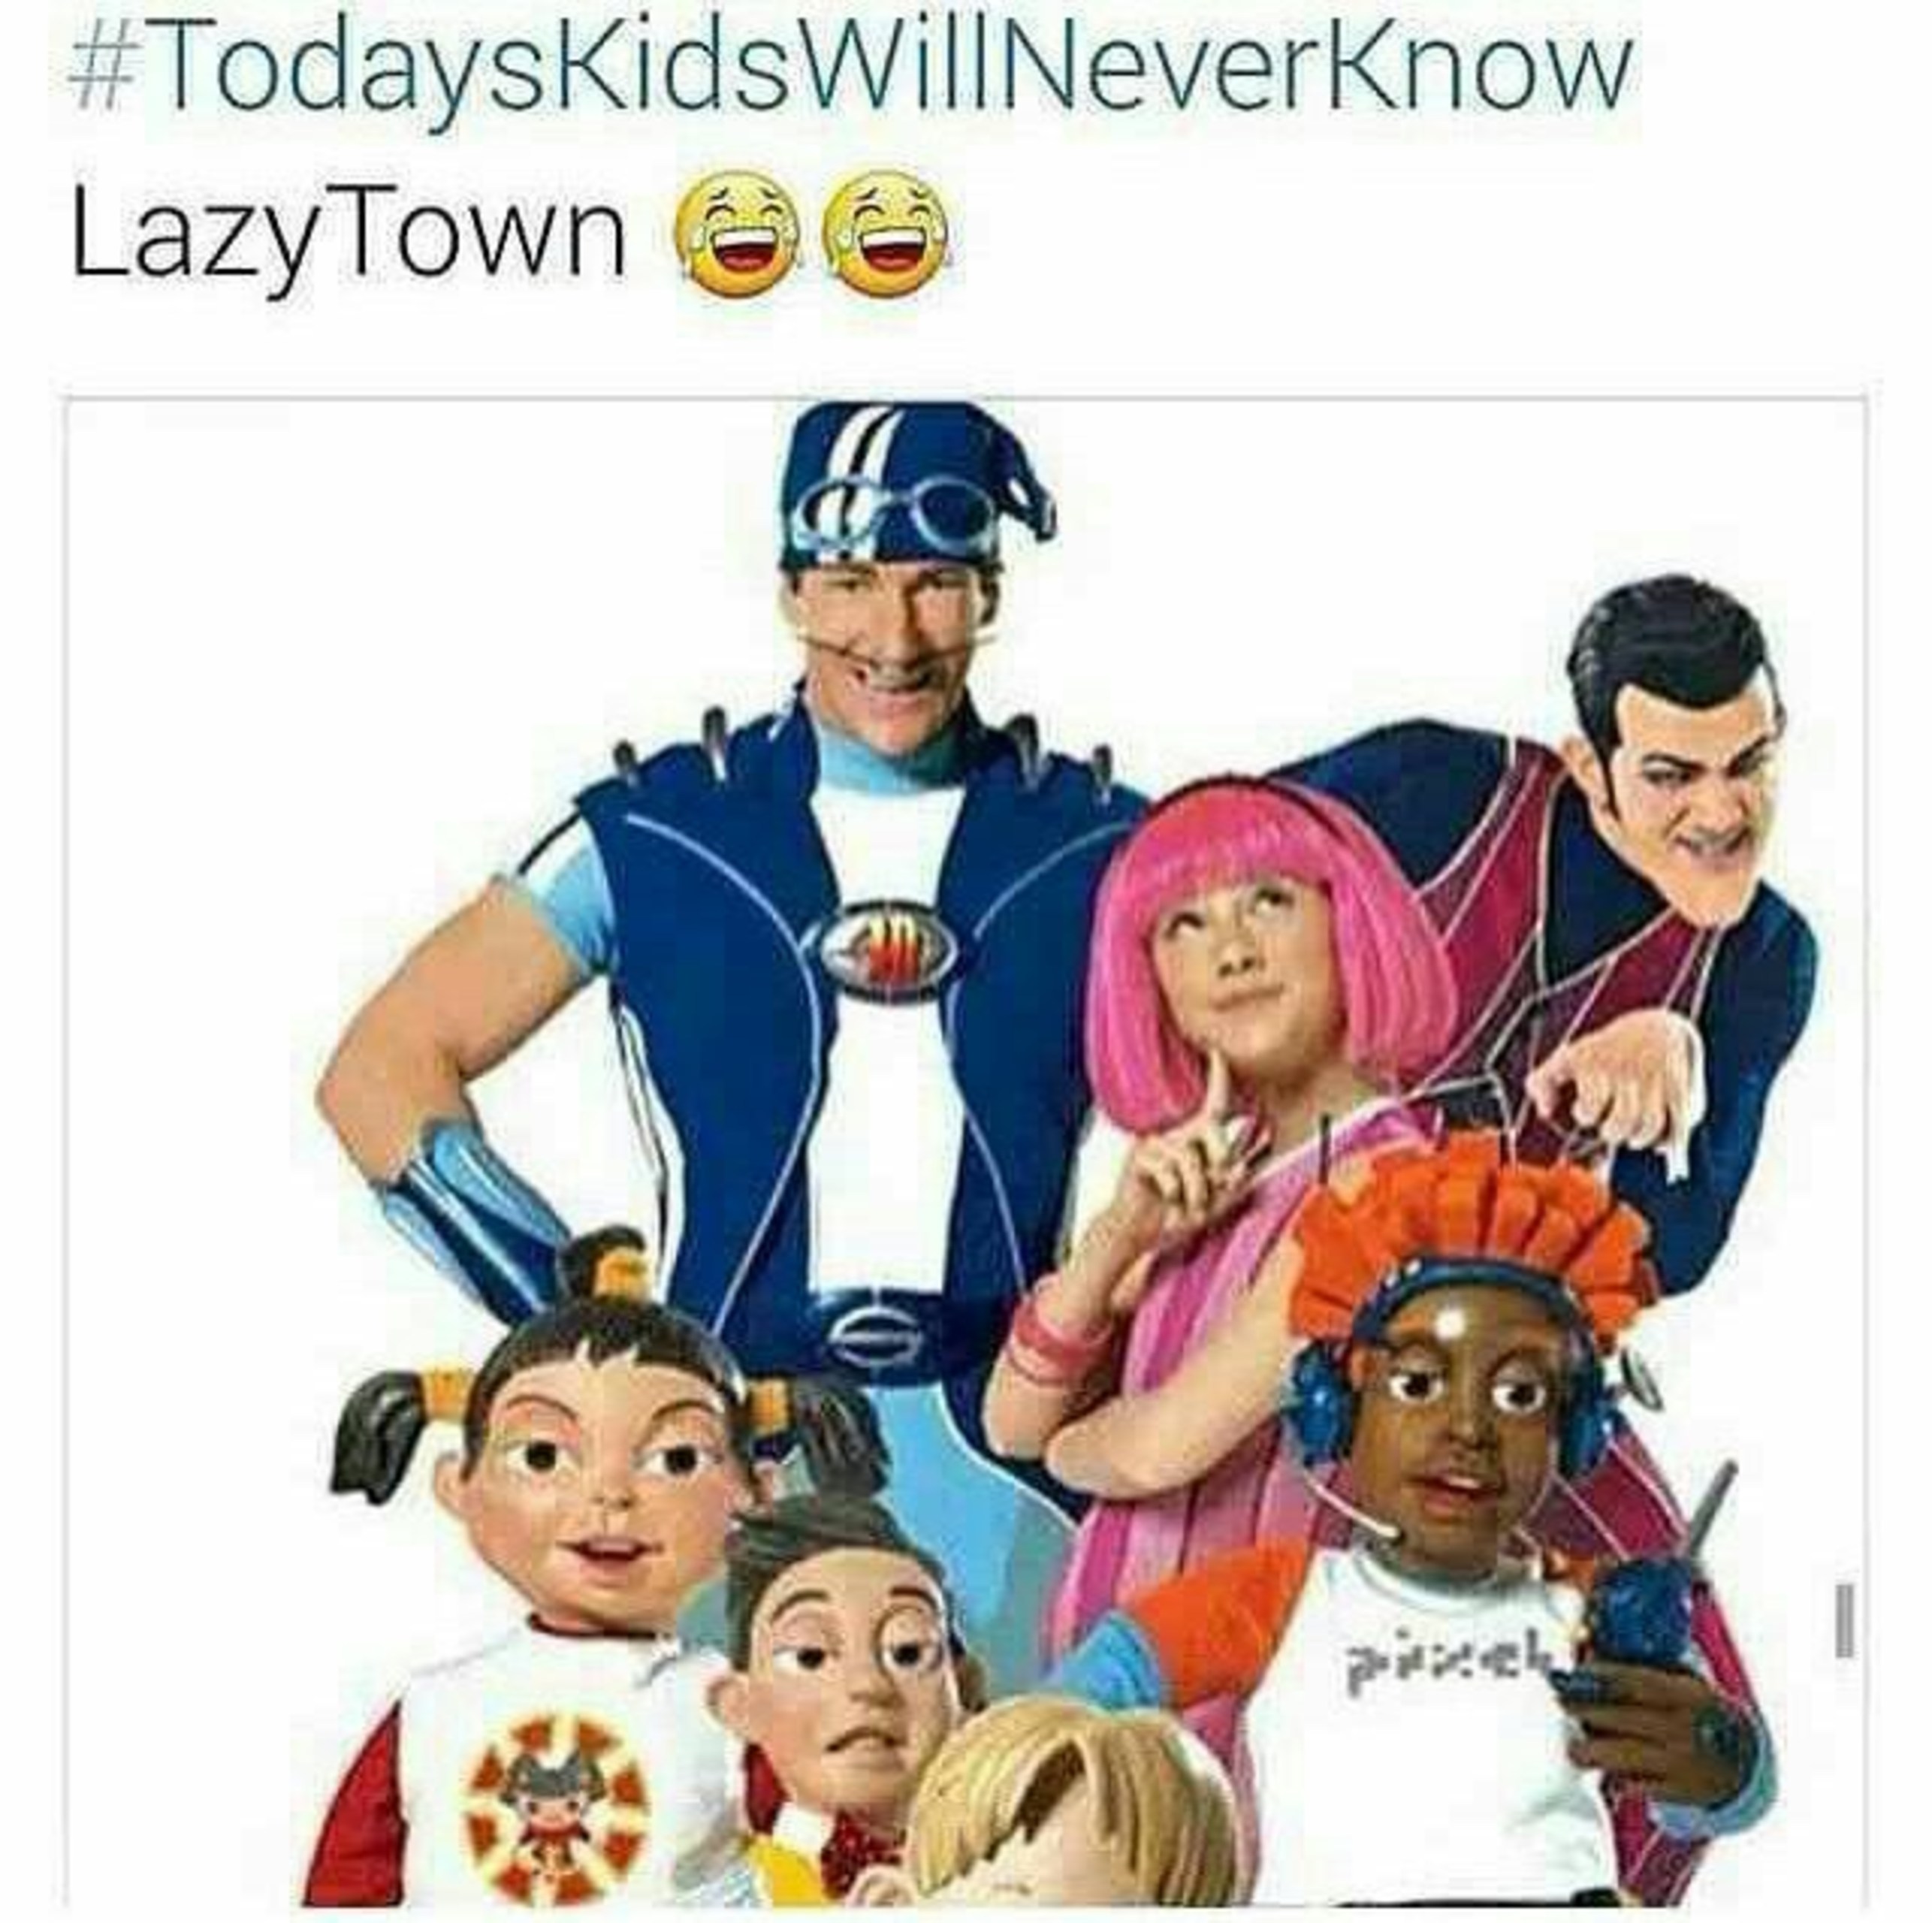 Mobiles Qhd - Lazy Town , HD Wallpaper & Backgrounds